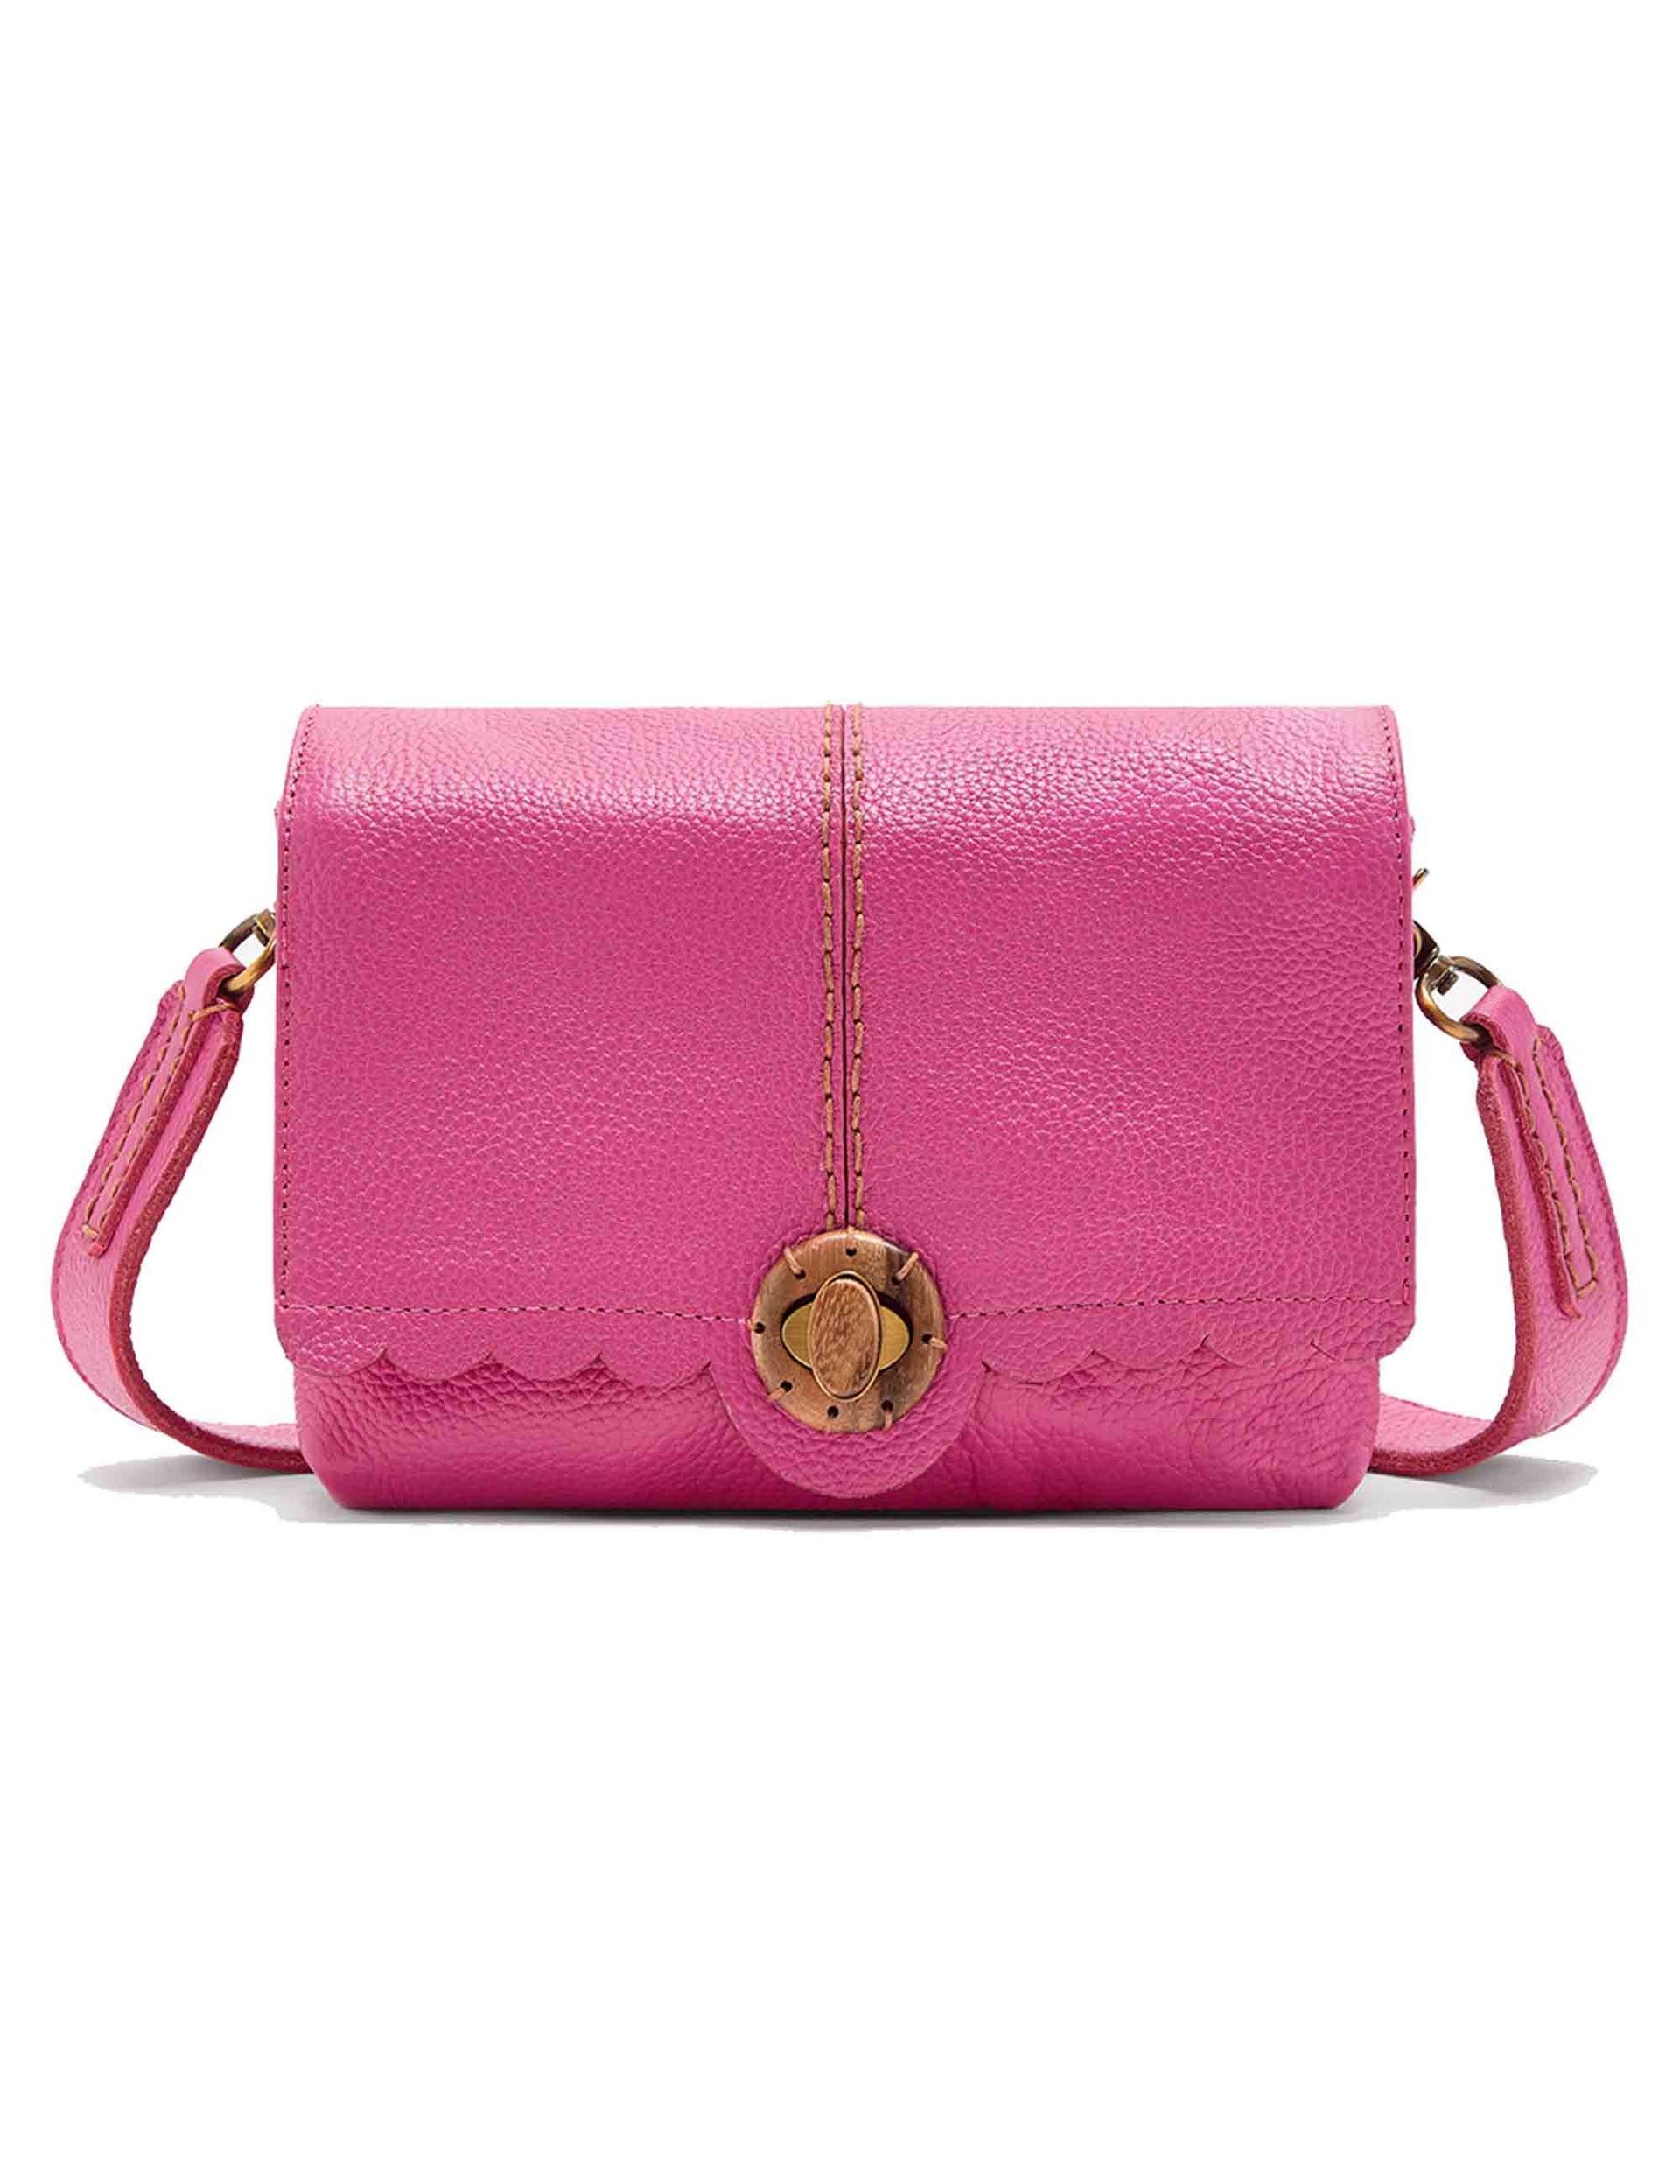 Textured women's shoulder clutch bags in pink leather